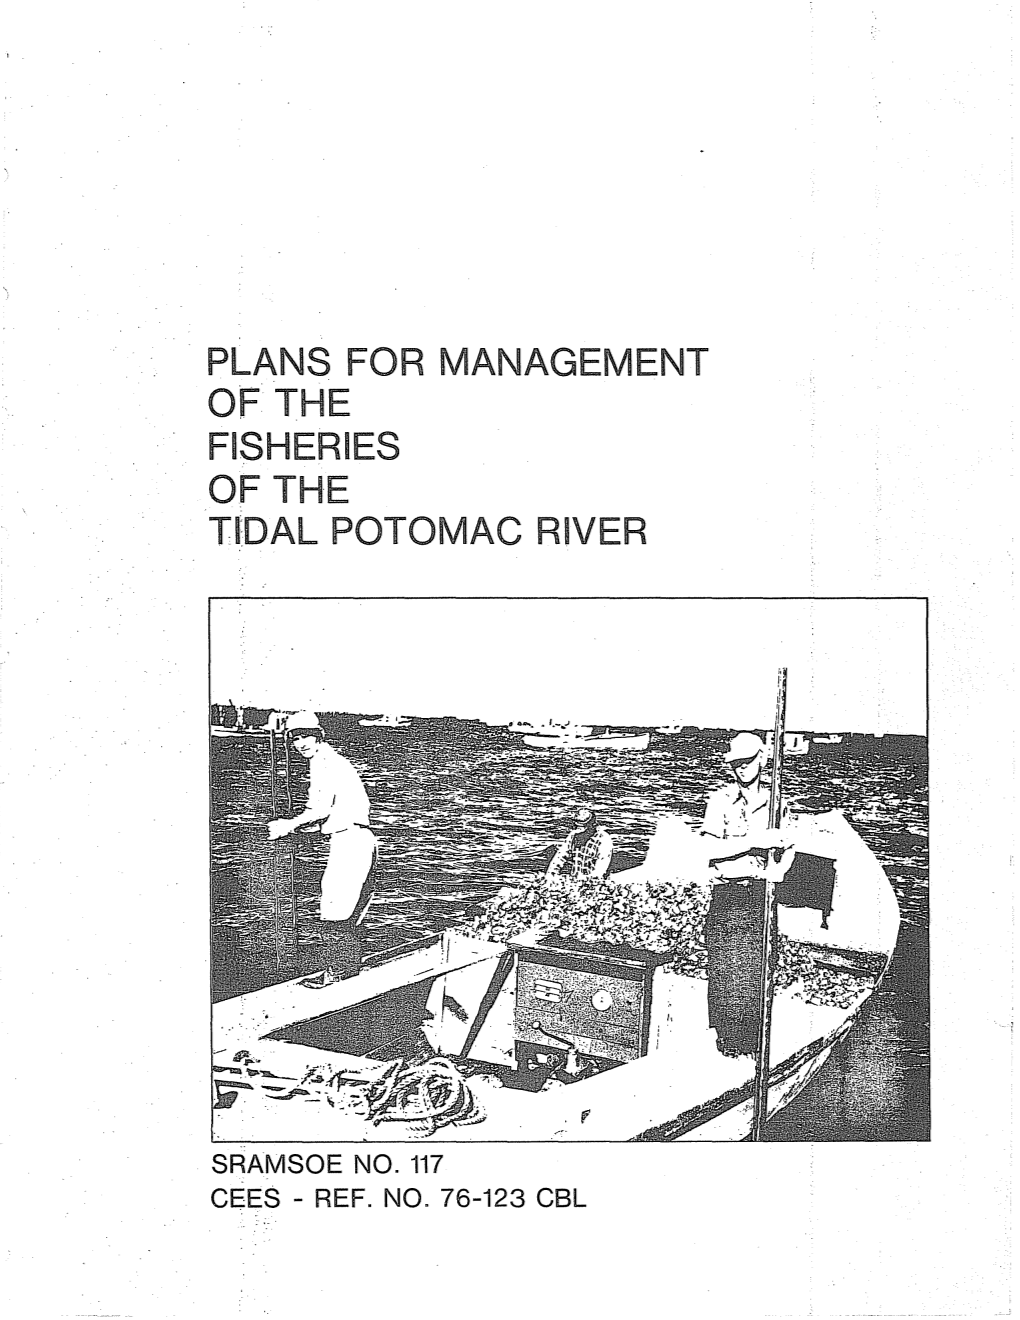 Plans for Management of the Fisheries of the Tidal Potomac River